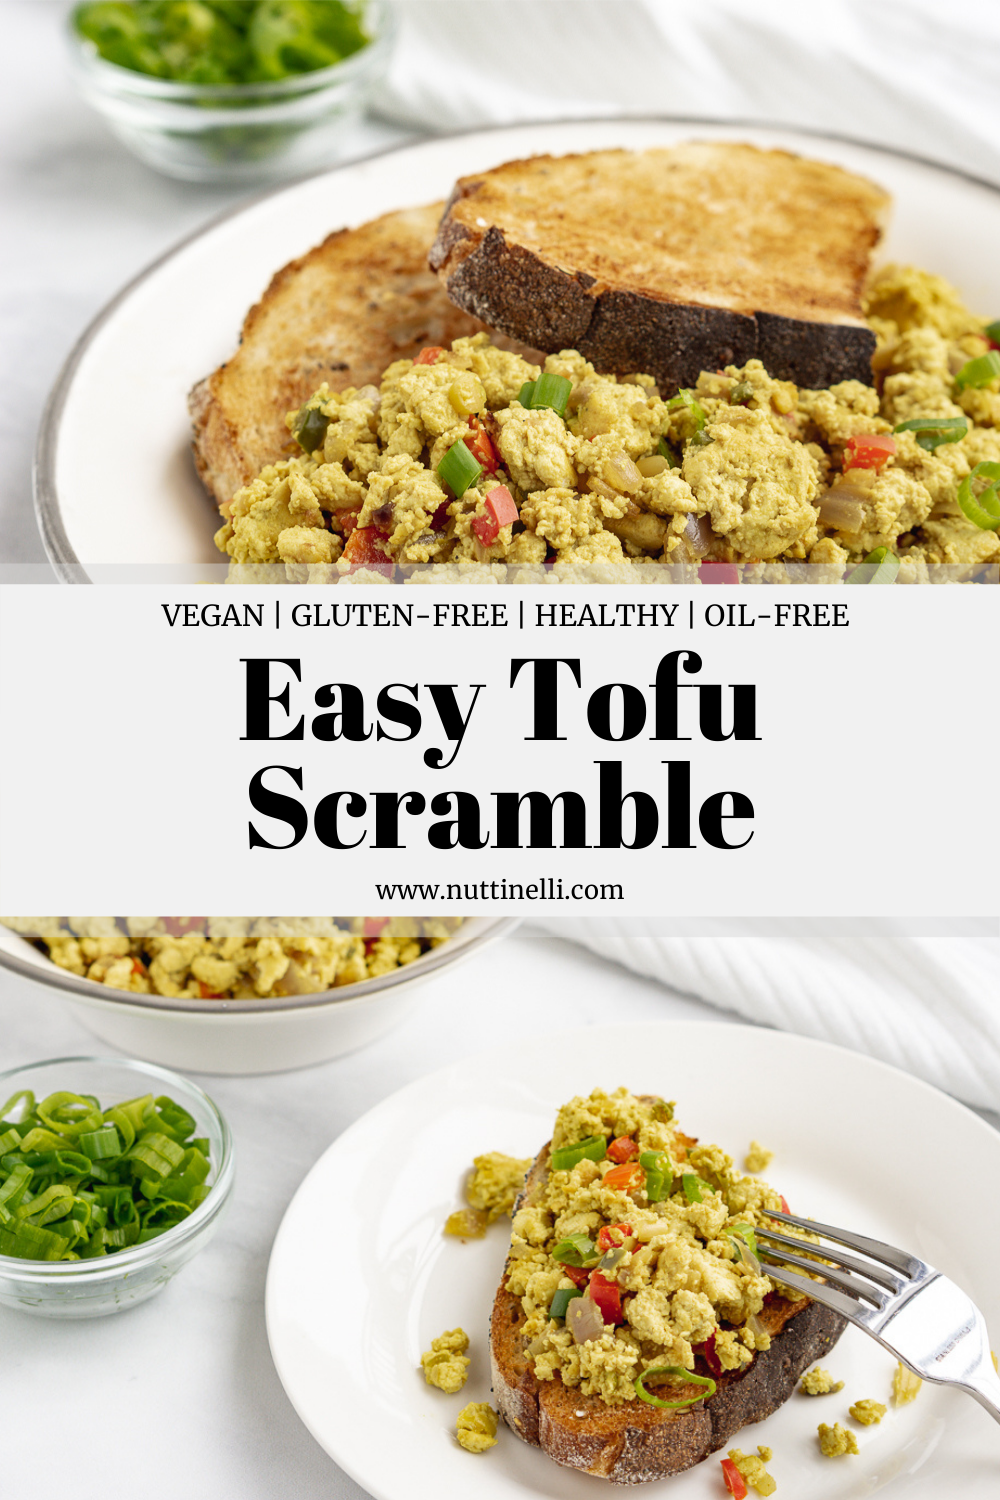 Forget About Eggs, Make This Easy Tofu Scramble! - Nutti Nelli